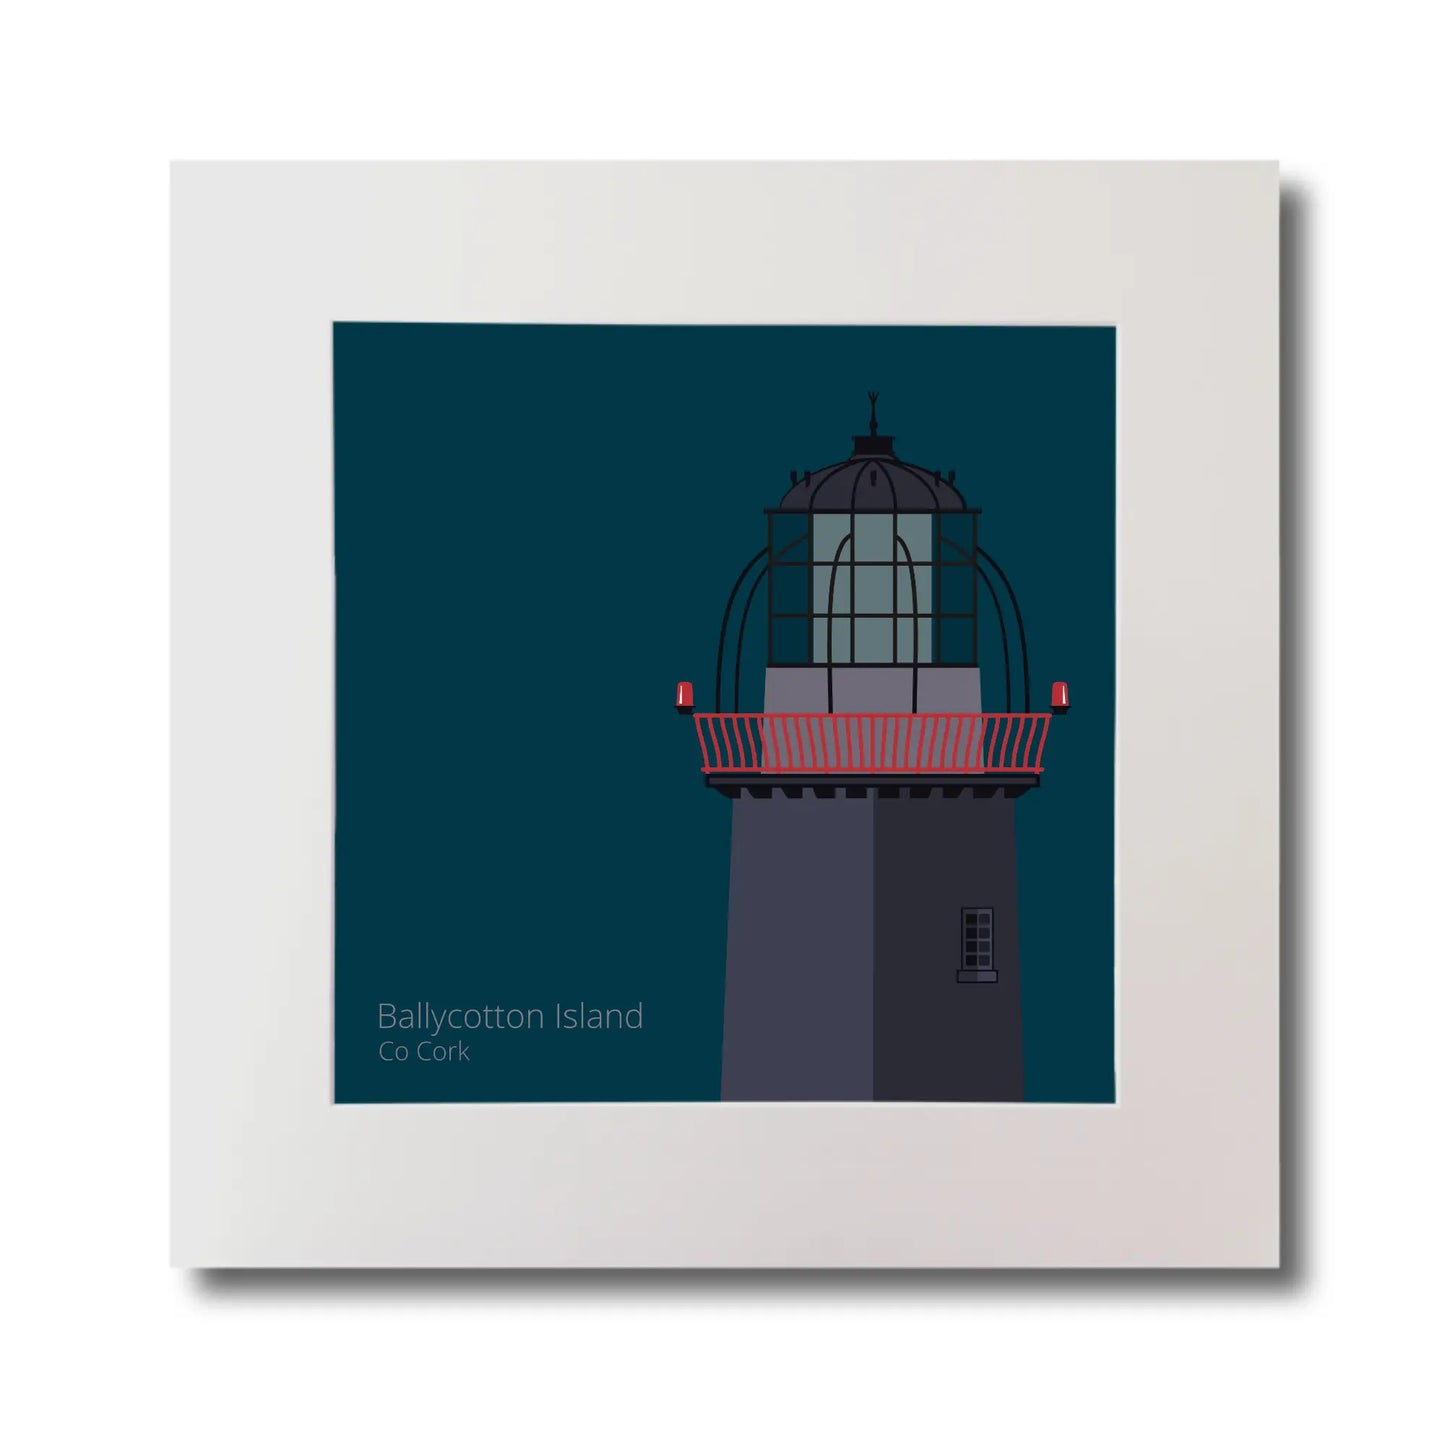 Illustration of Ballycotton lighthouse on a midnight blue background, mounted and measuring 30x30cm.